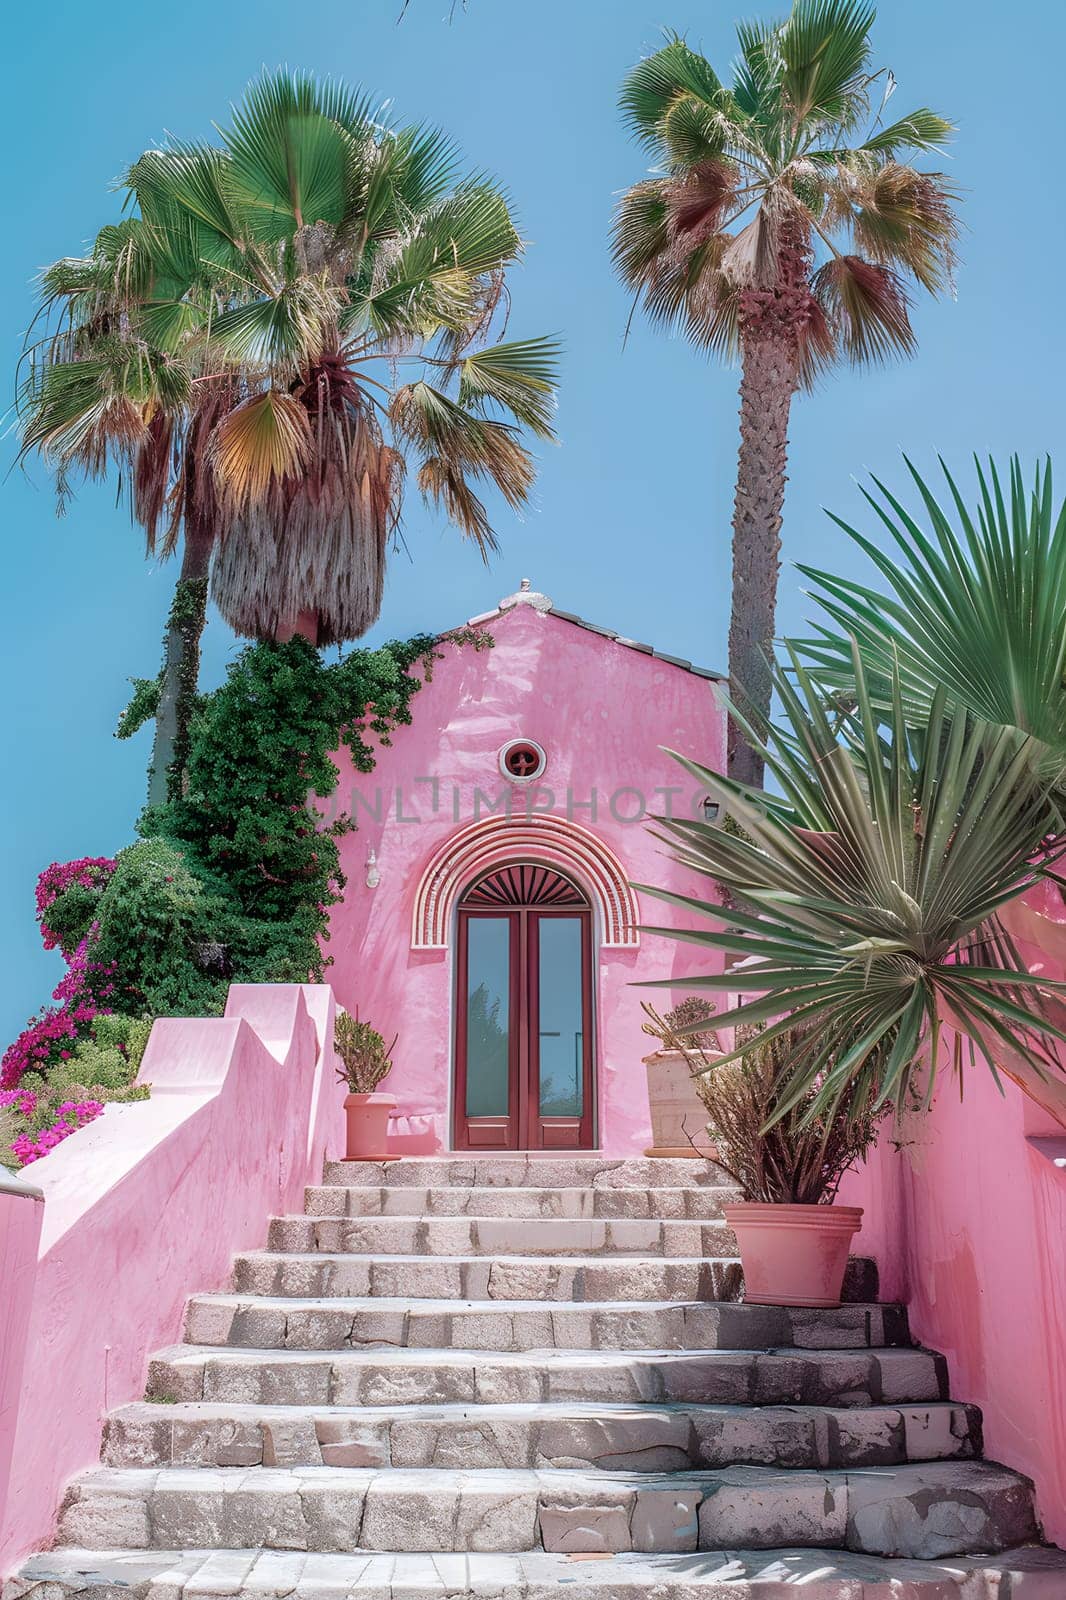 A symmetrical pink building with palm trees in the landscape. Stairs lead up to the entrance door, creating a picturesque facade against the sky